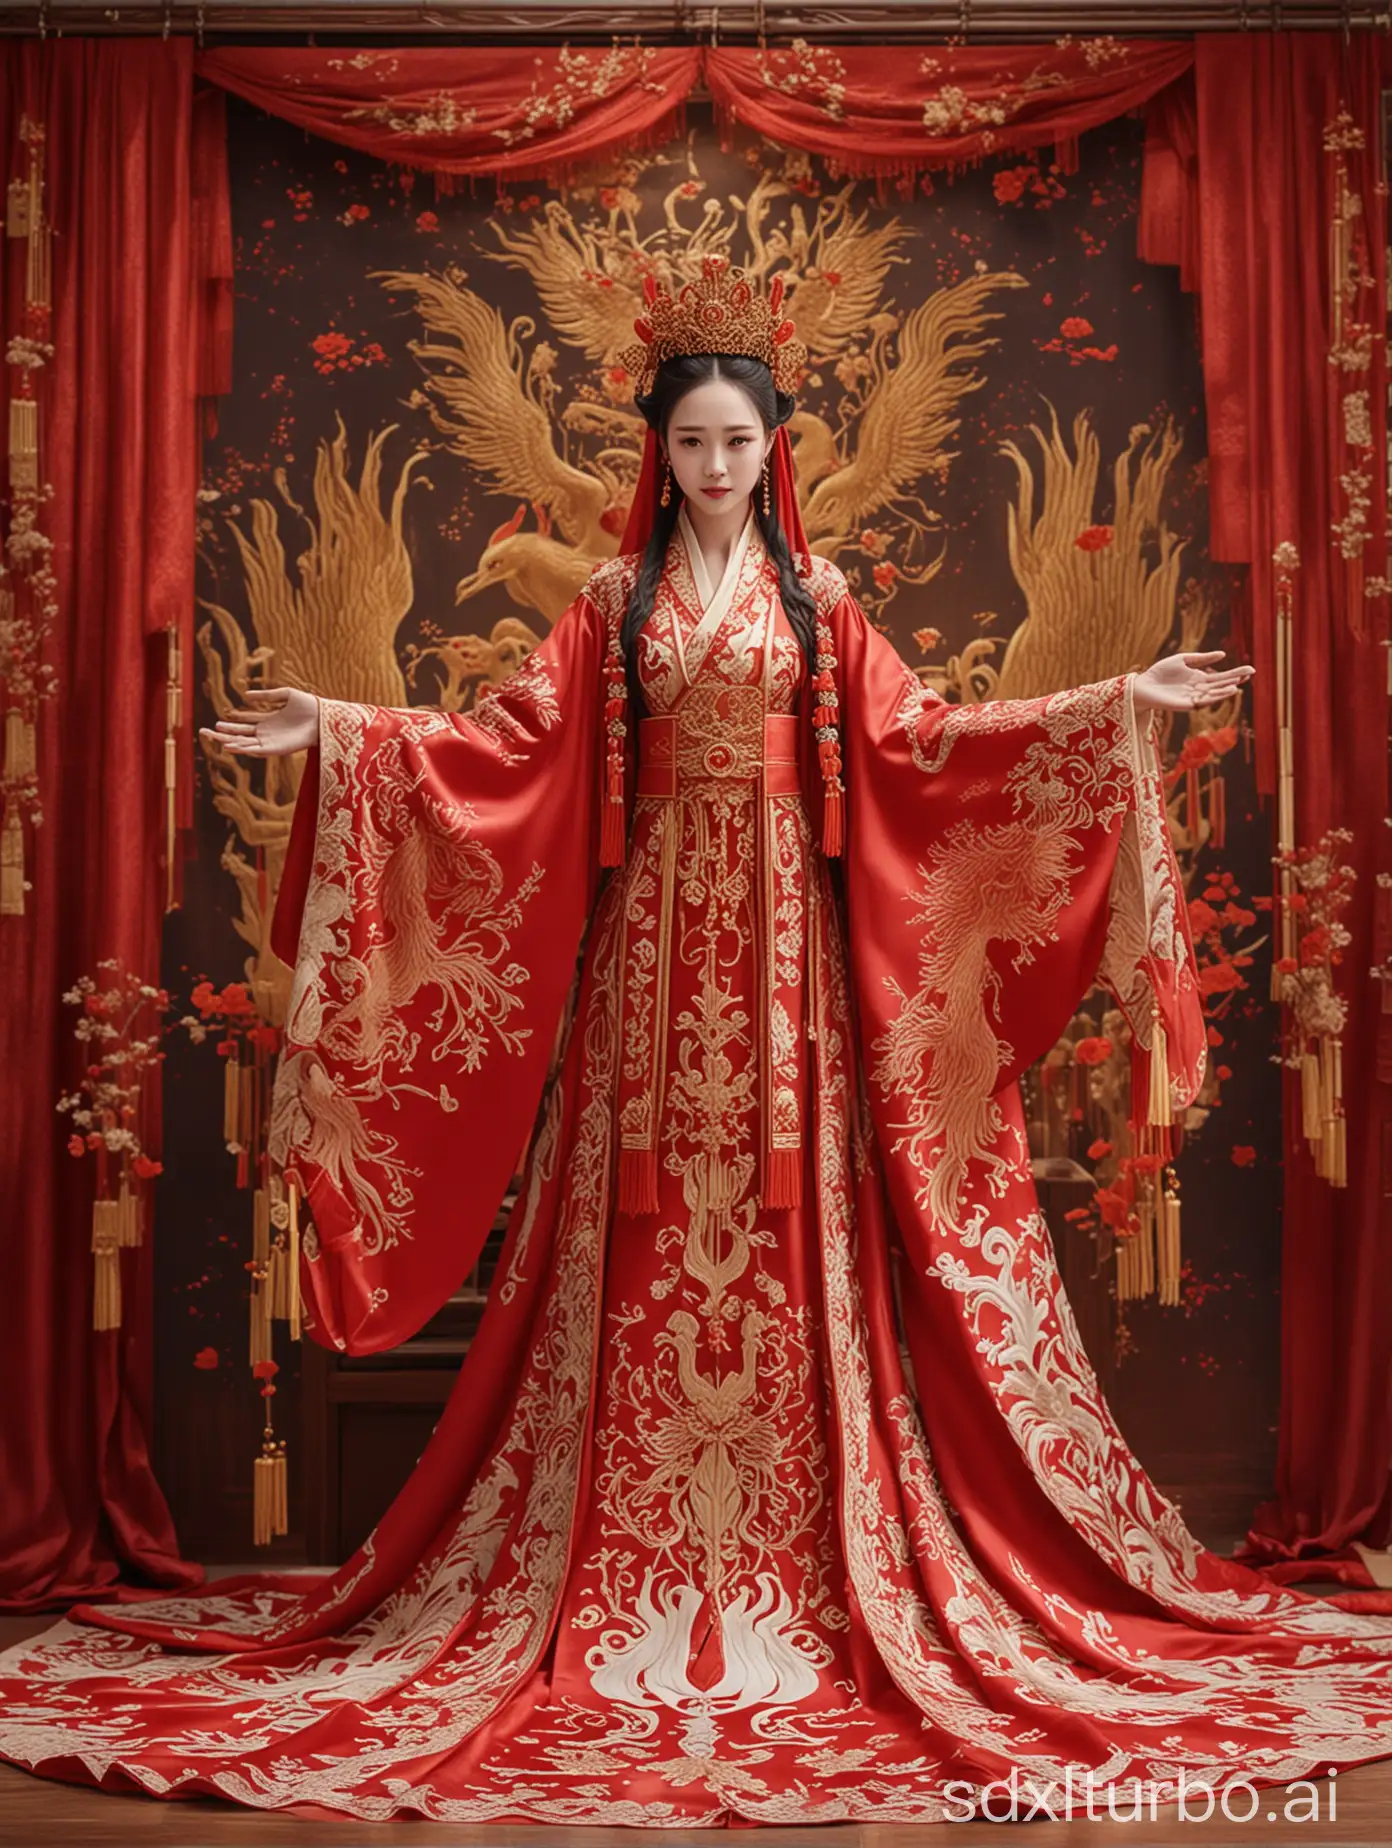 Ancient-Chinese-Queen-Wedding-Ceremony-with-Phoenix-Crown-and-Xia-Curtains